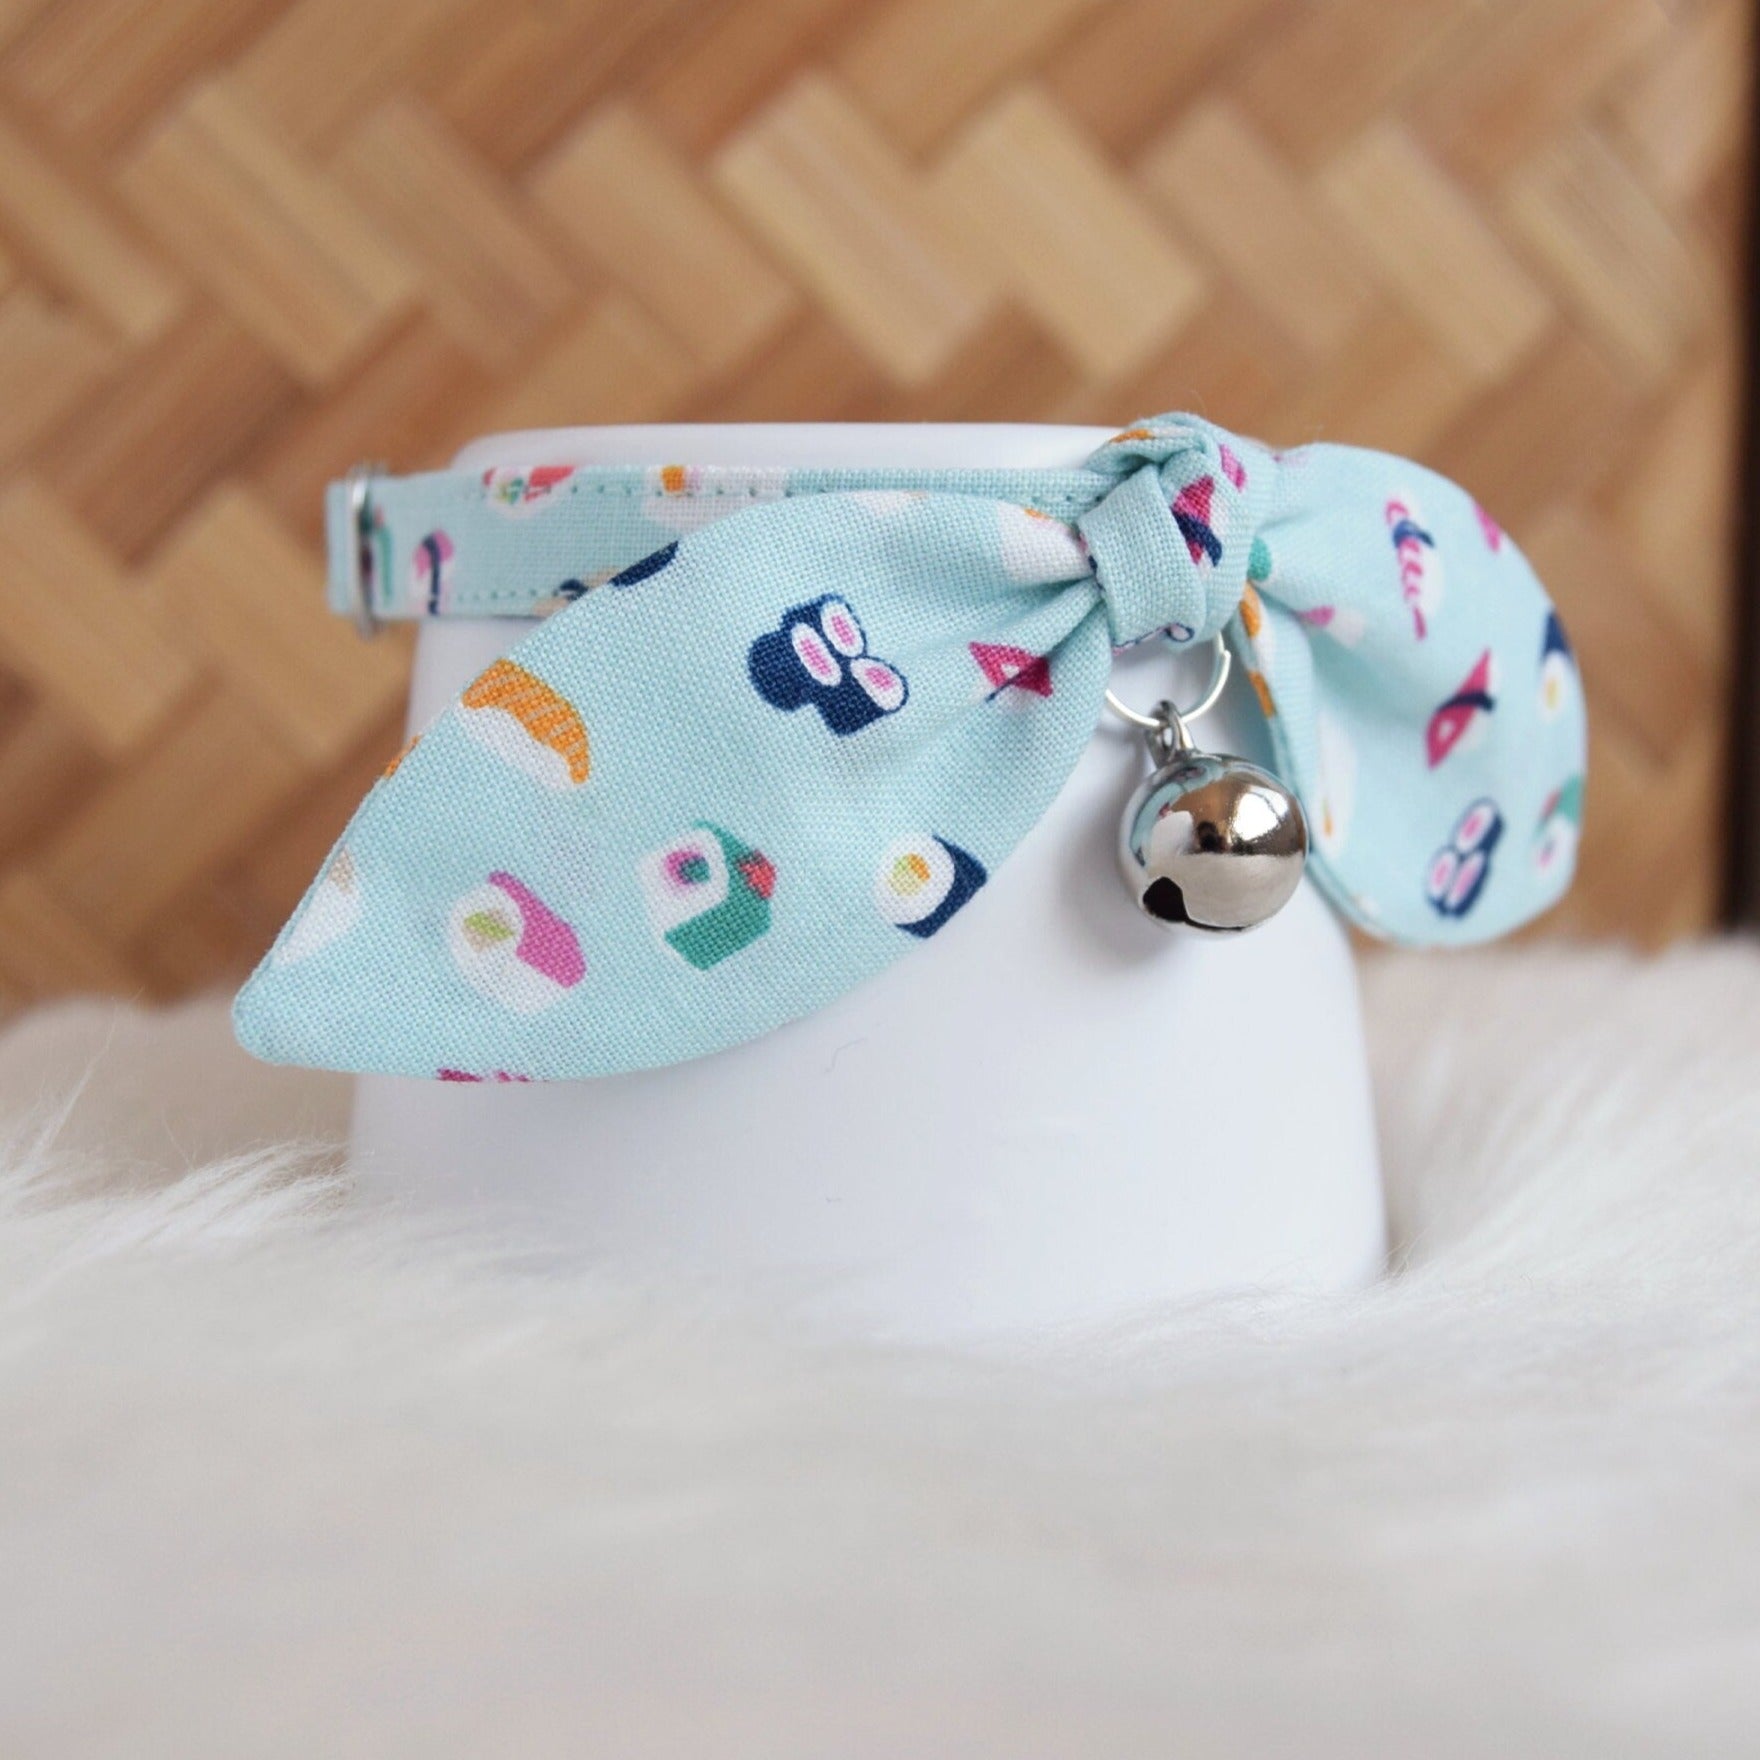 Sushi Cat Collar with Bow - Fun Colorful Breakaway Collar for Cats and Kittens - Soft Cotton Fabric Collar